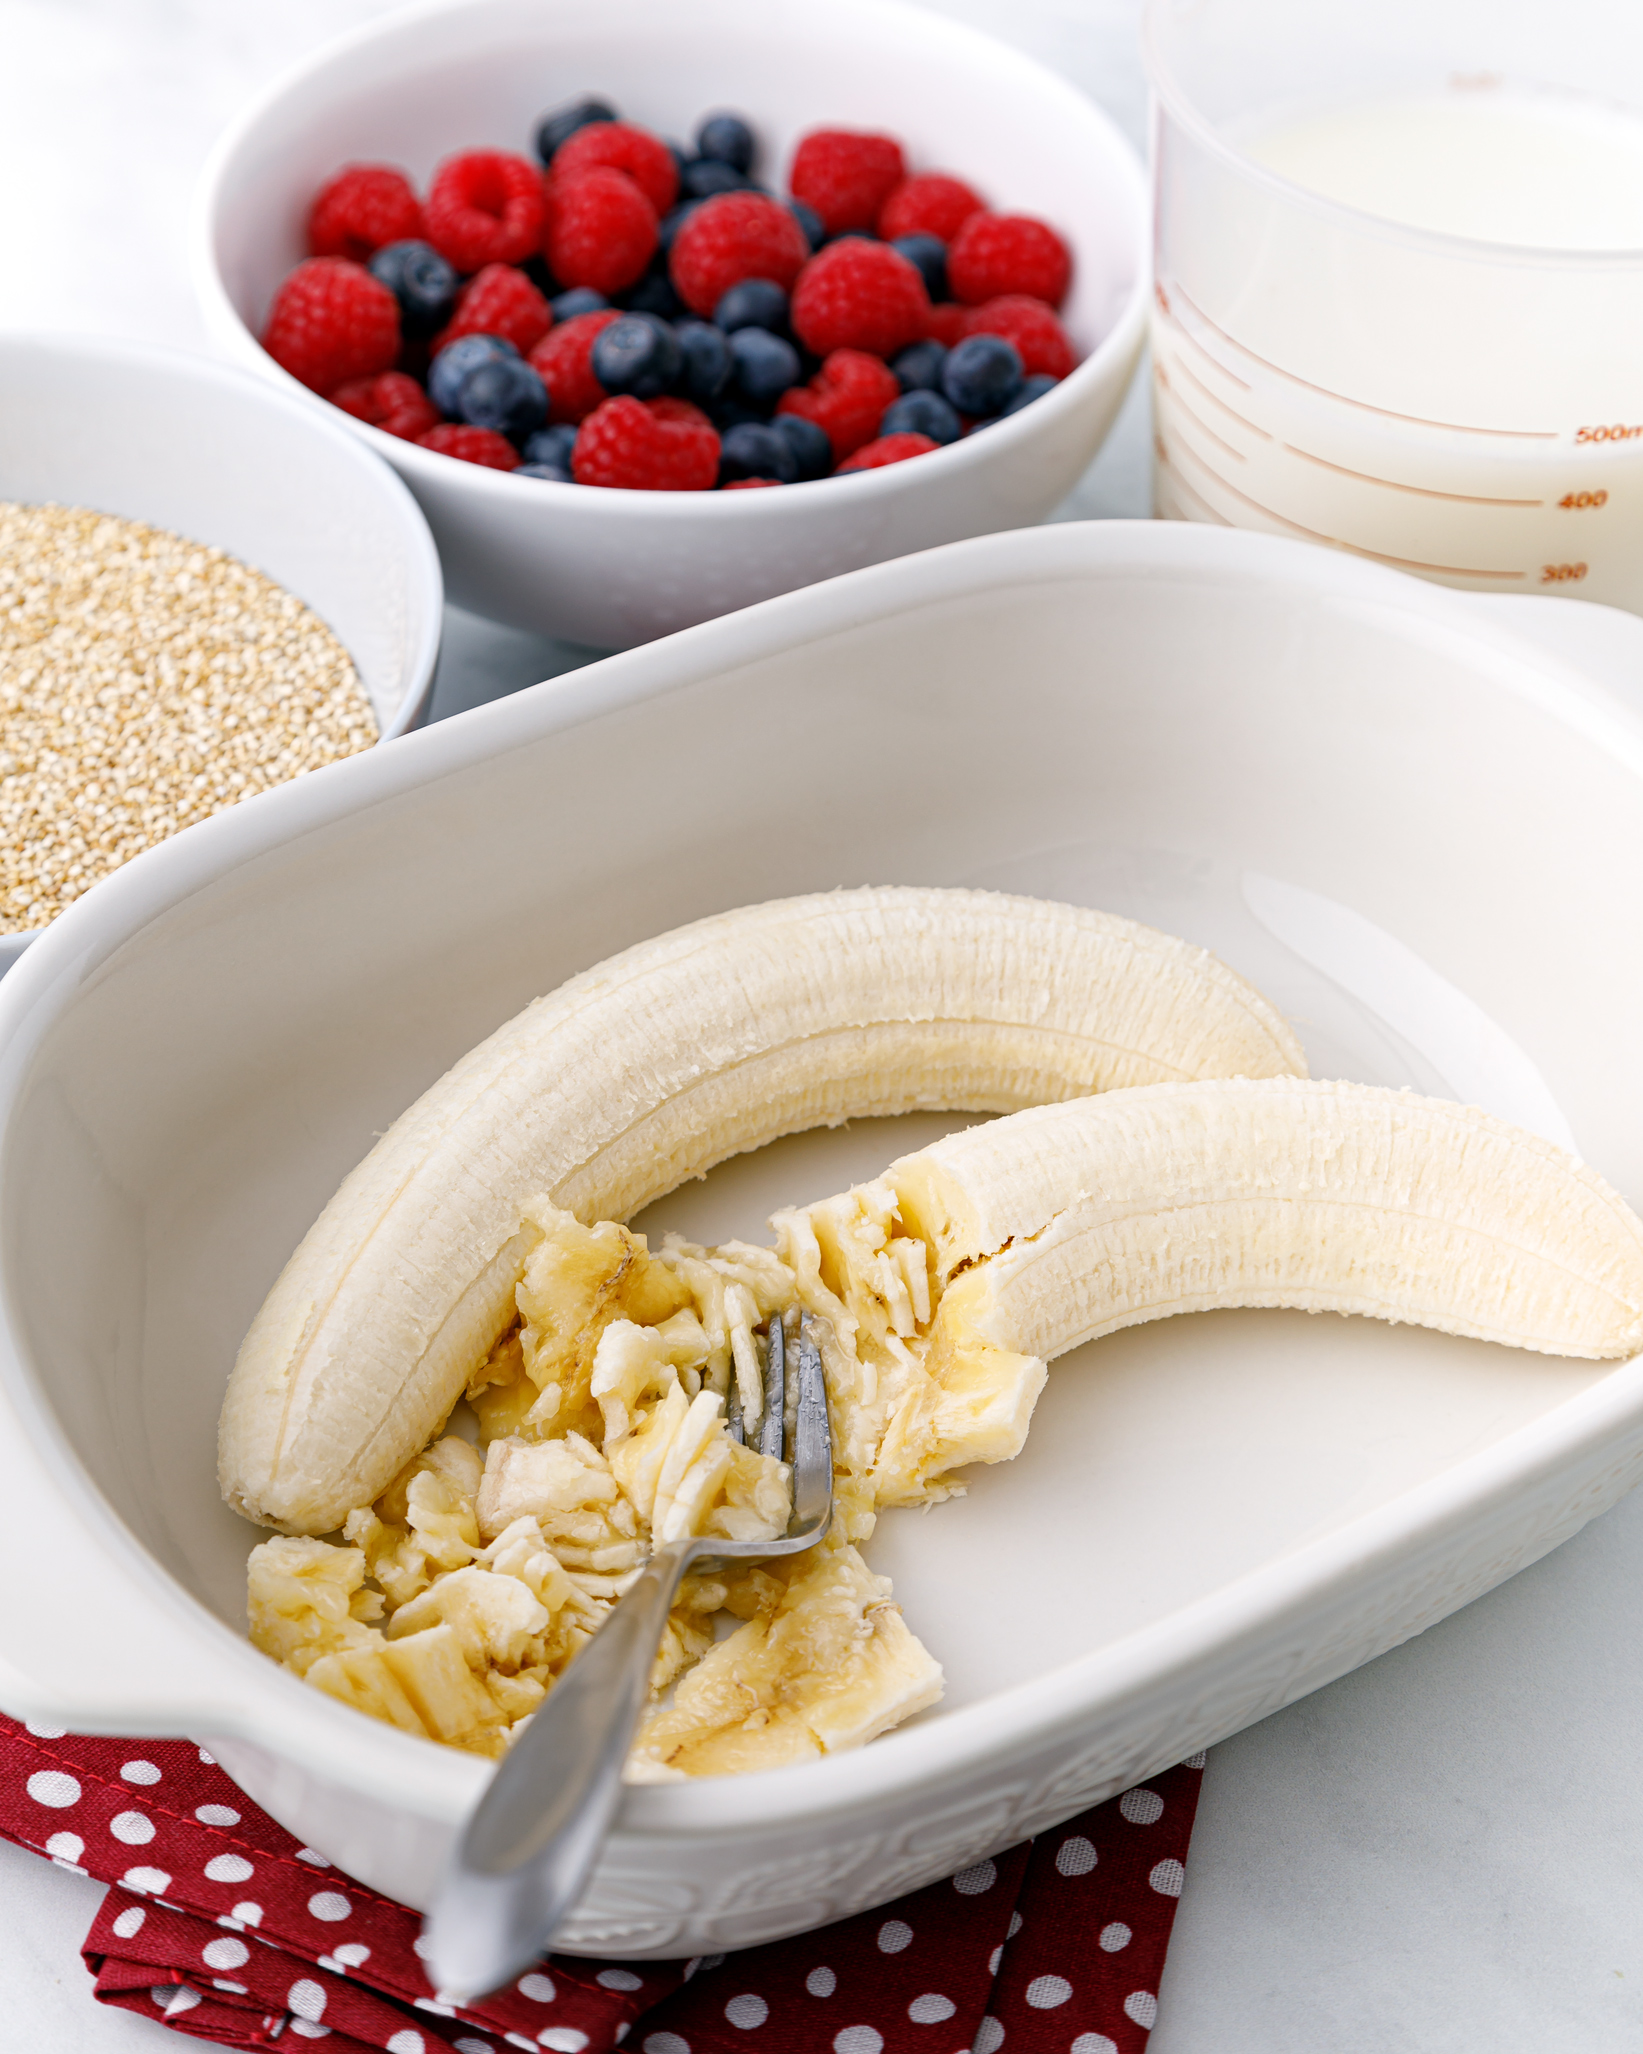 a white casserole dish with two peeled bananas partially mashed and a fork lying in the dish. There is a white bowl with fresh berries as well as a bowl of dry quinoa behind it.